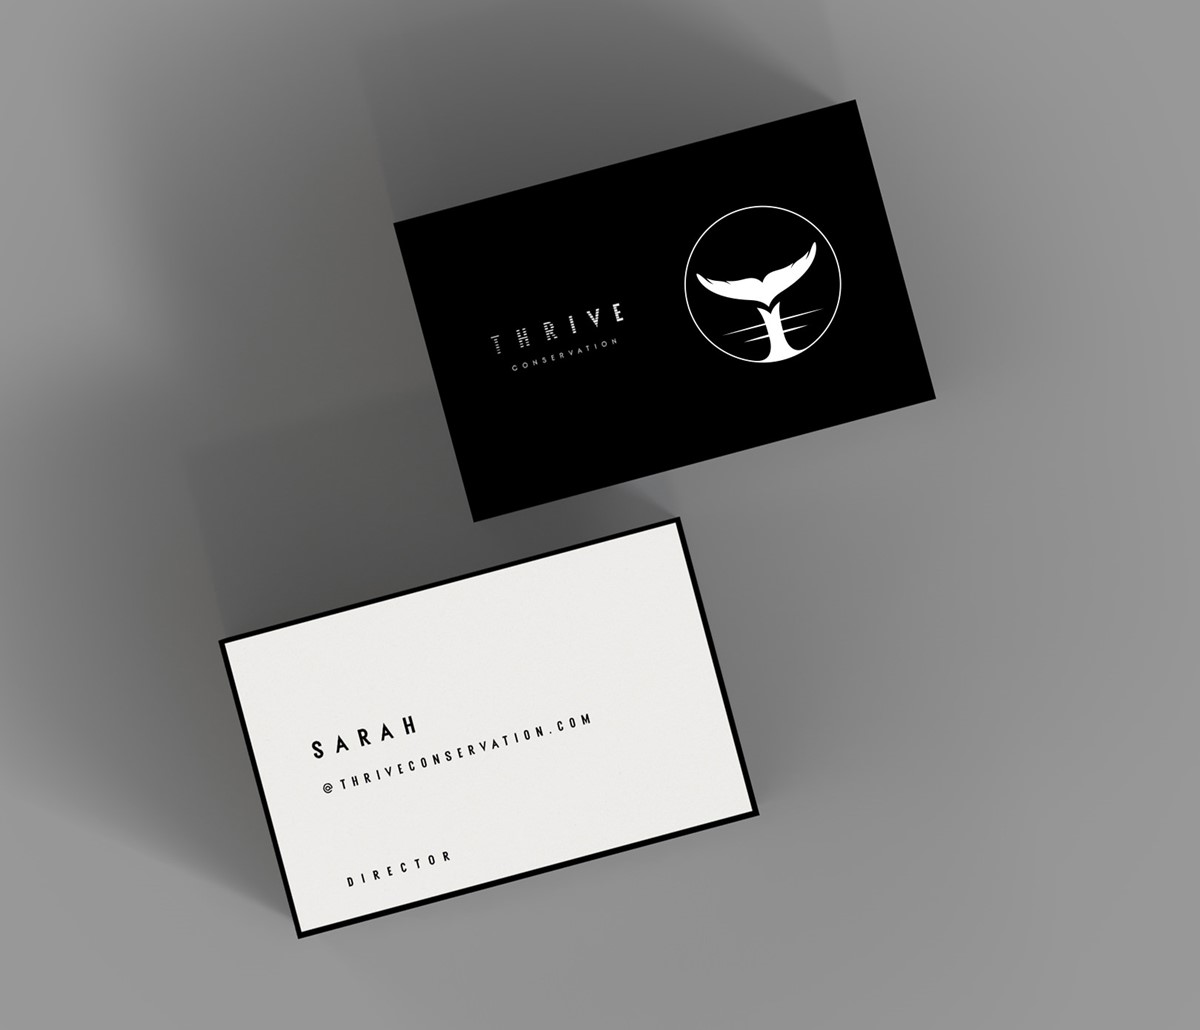 Thrive Conservation business cards mock-up. Brand identity design by Superfried.